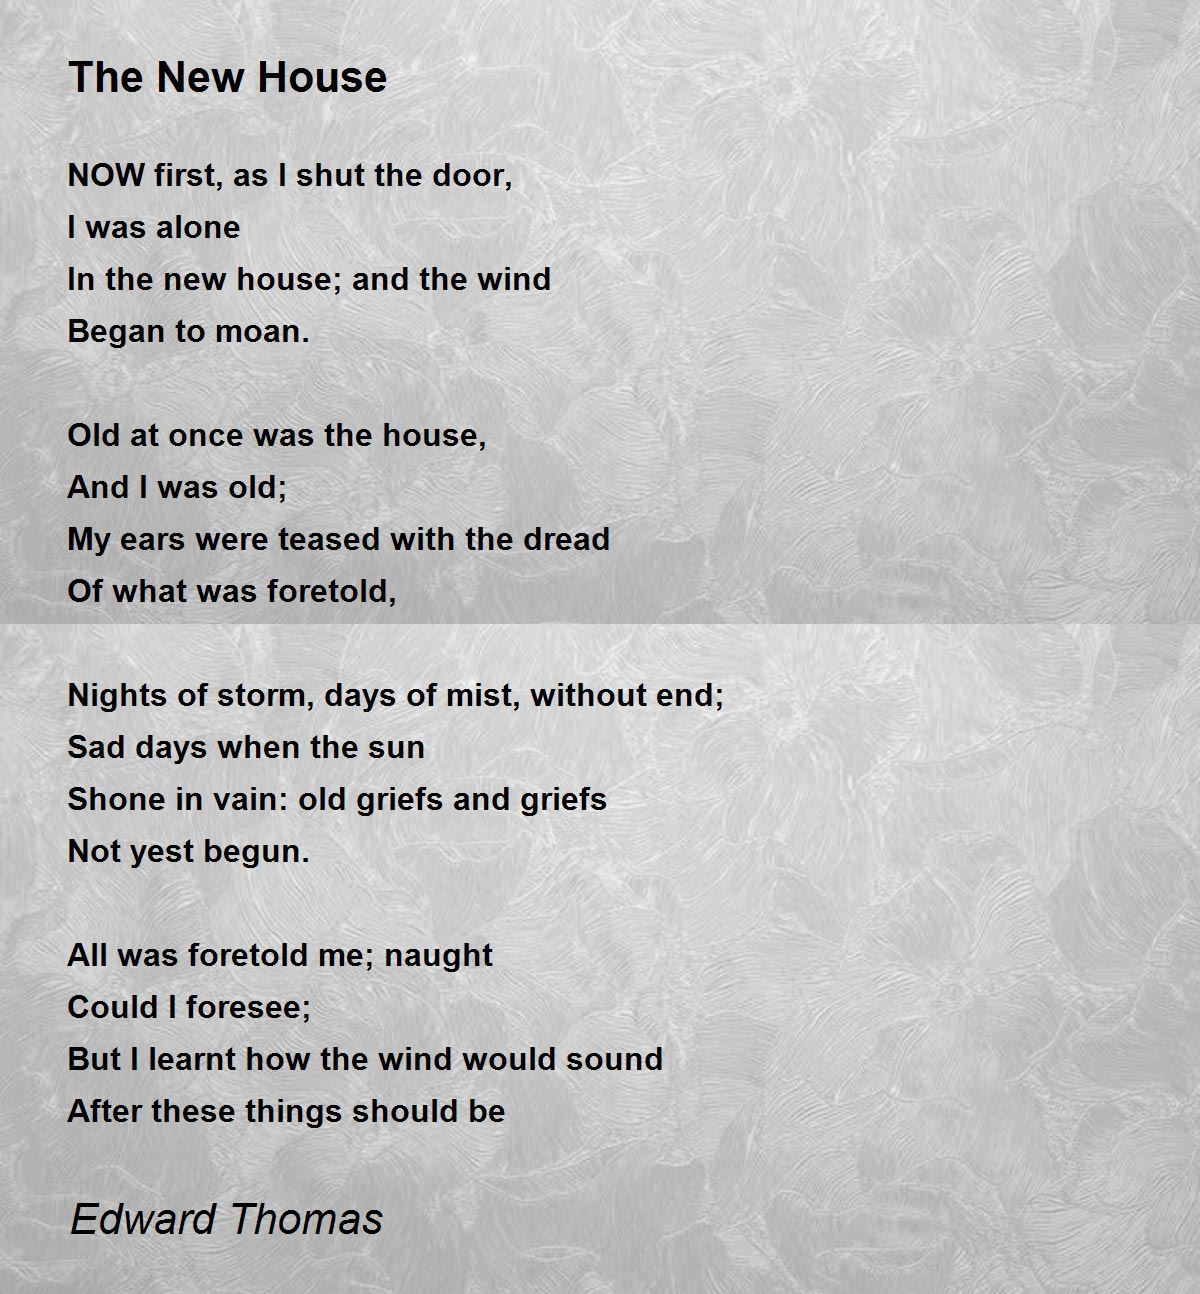 The New House - The New House Poem by Edward Thomas